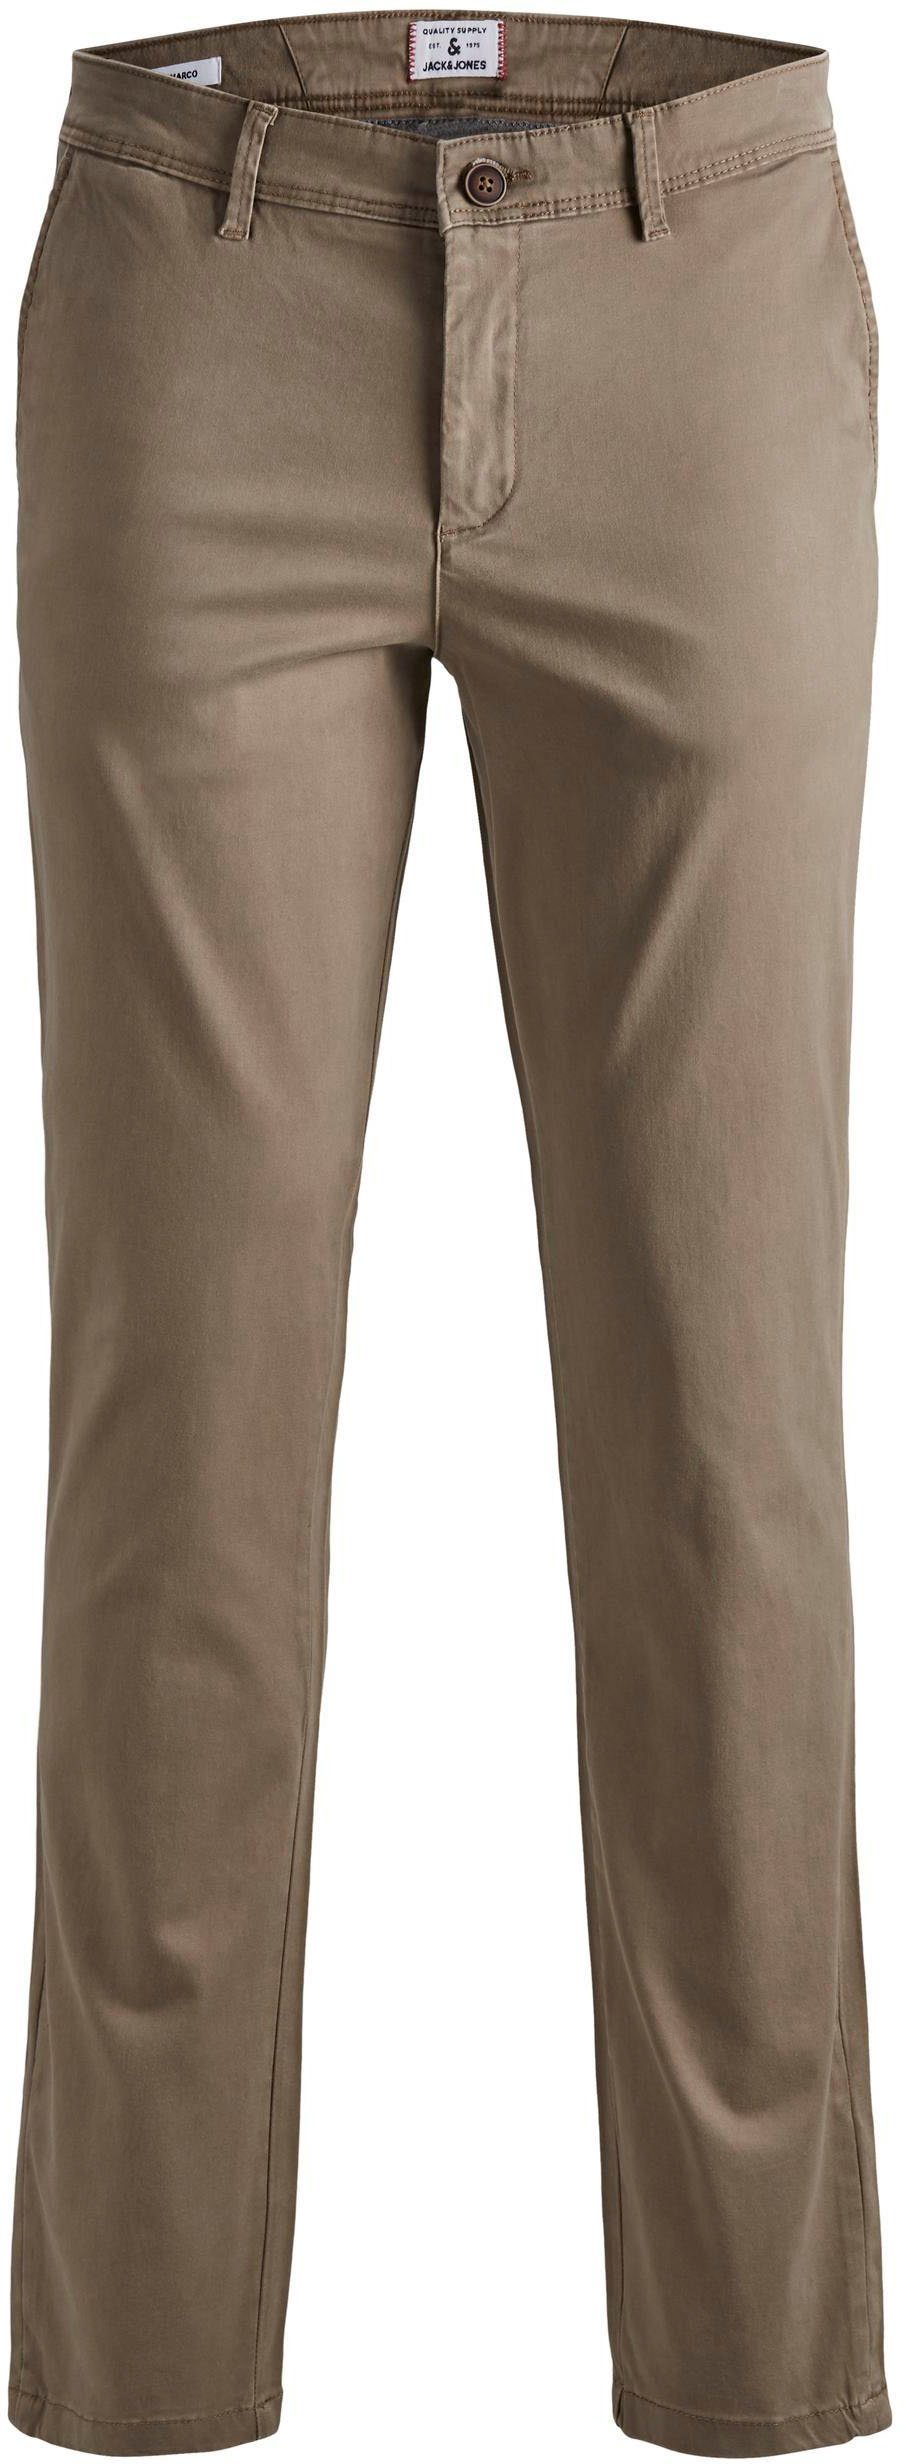 Jack & Jones PlusSize Chinohose MARCO beige BOWIE (Packung)